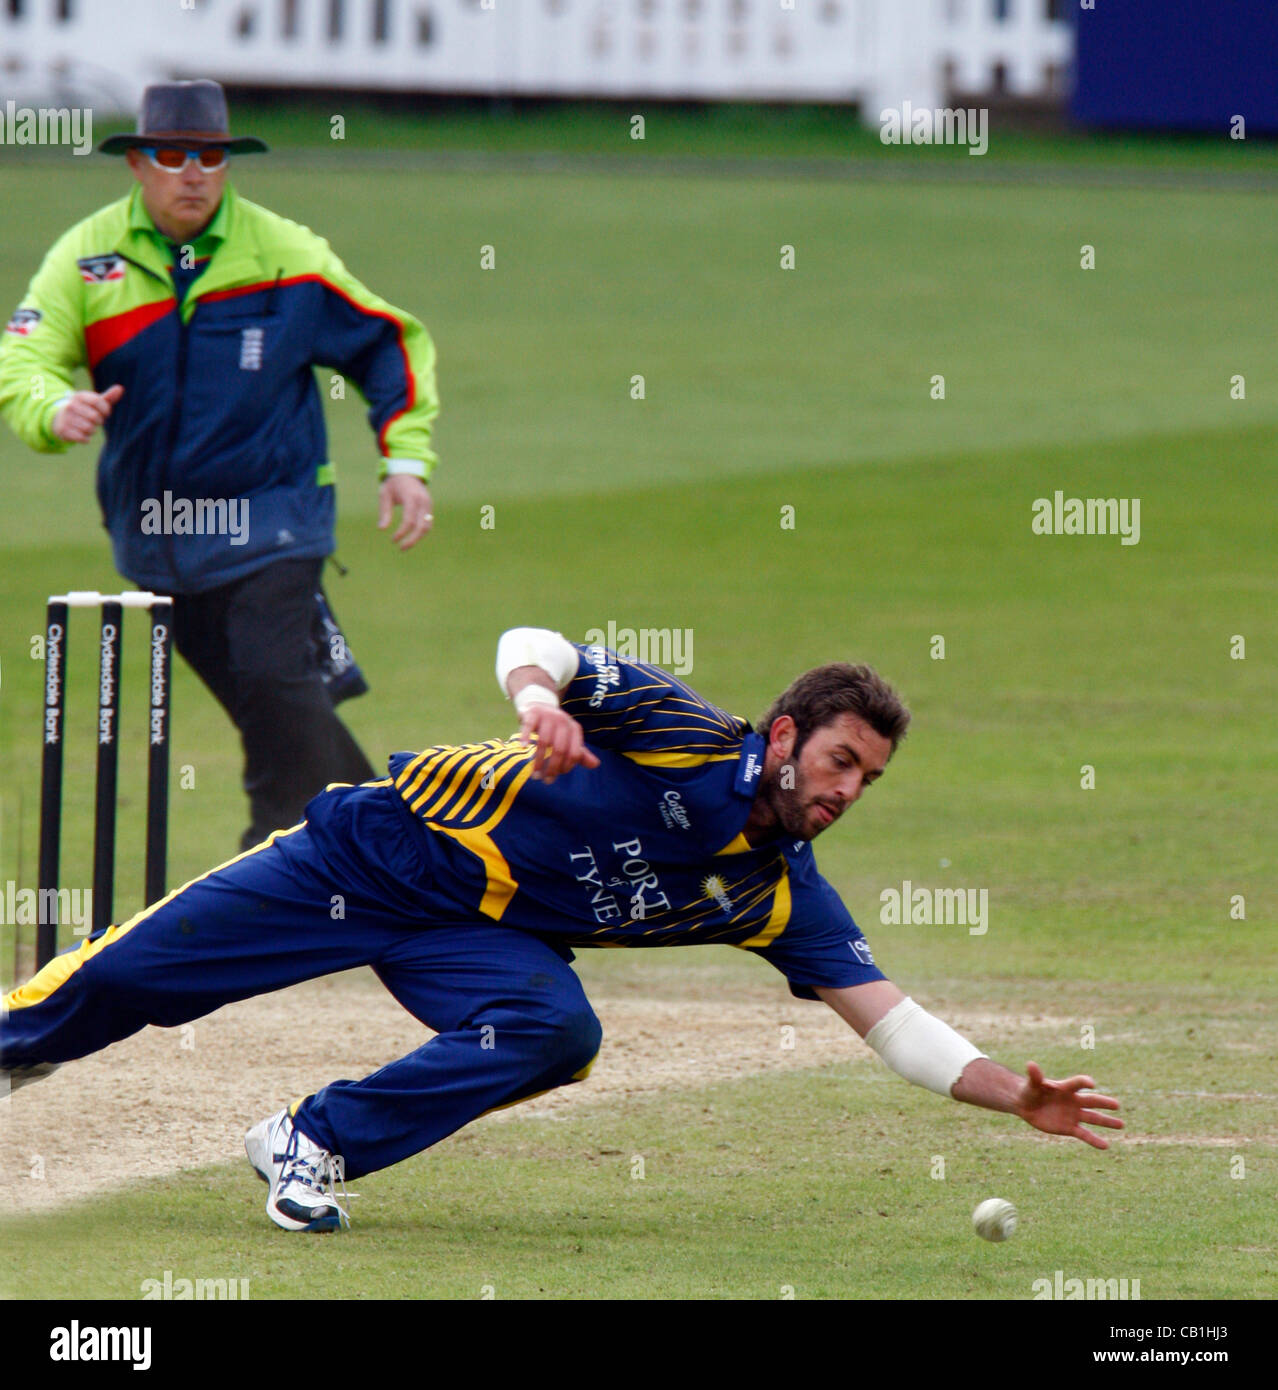 20.05.12 The Brit Oval, London, ENGLAND: Liam Plunkett of Durham County Cricket in action during Clydesdale Bank Pro40 between Surrey Tigers  and Durham Dynamos at The Brit Oval Stadium on May 20, 2012 in London, England. Stock Photo